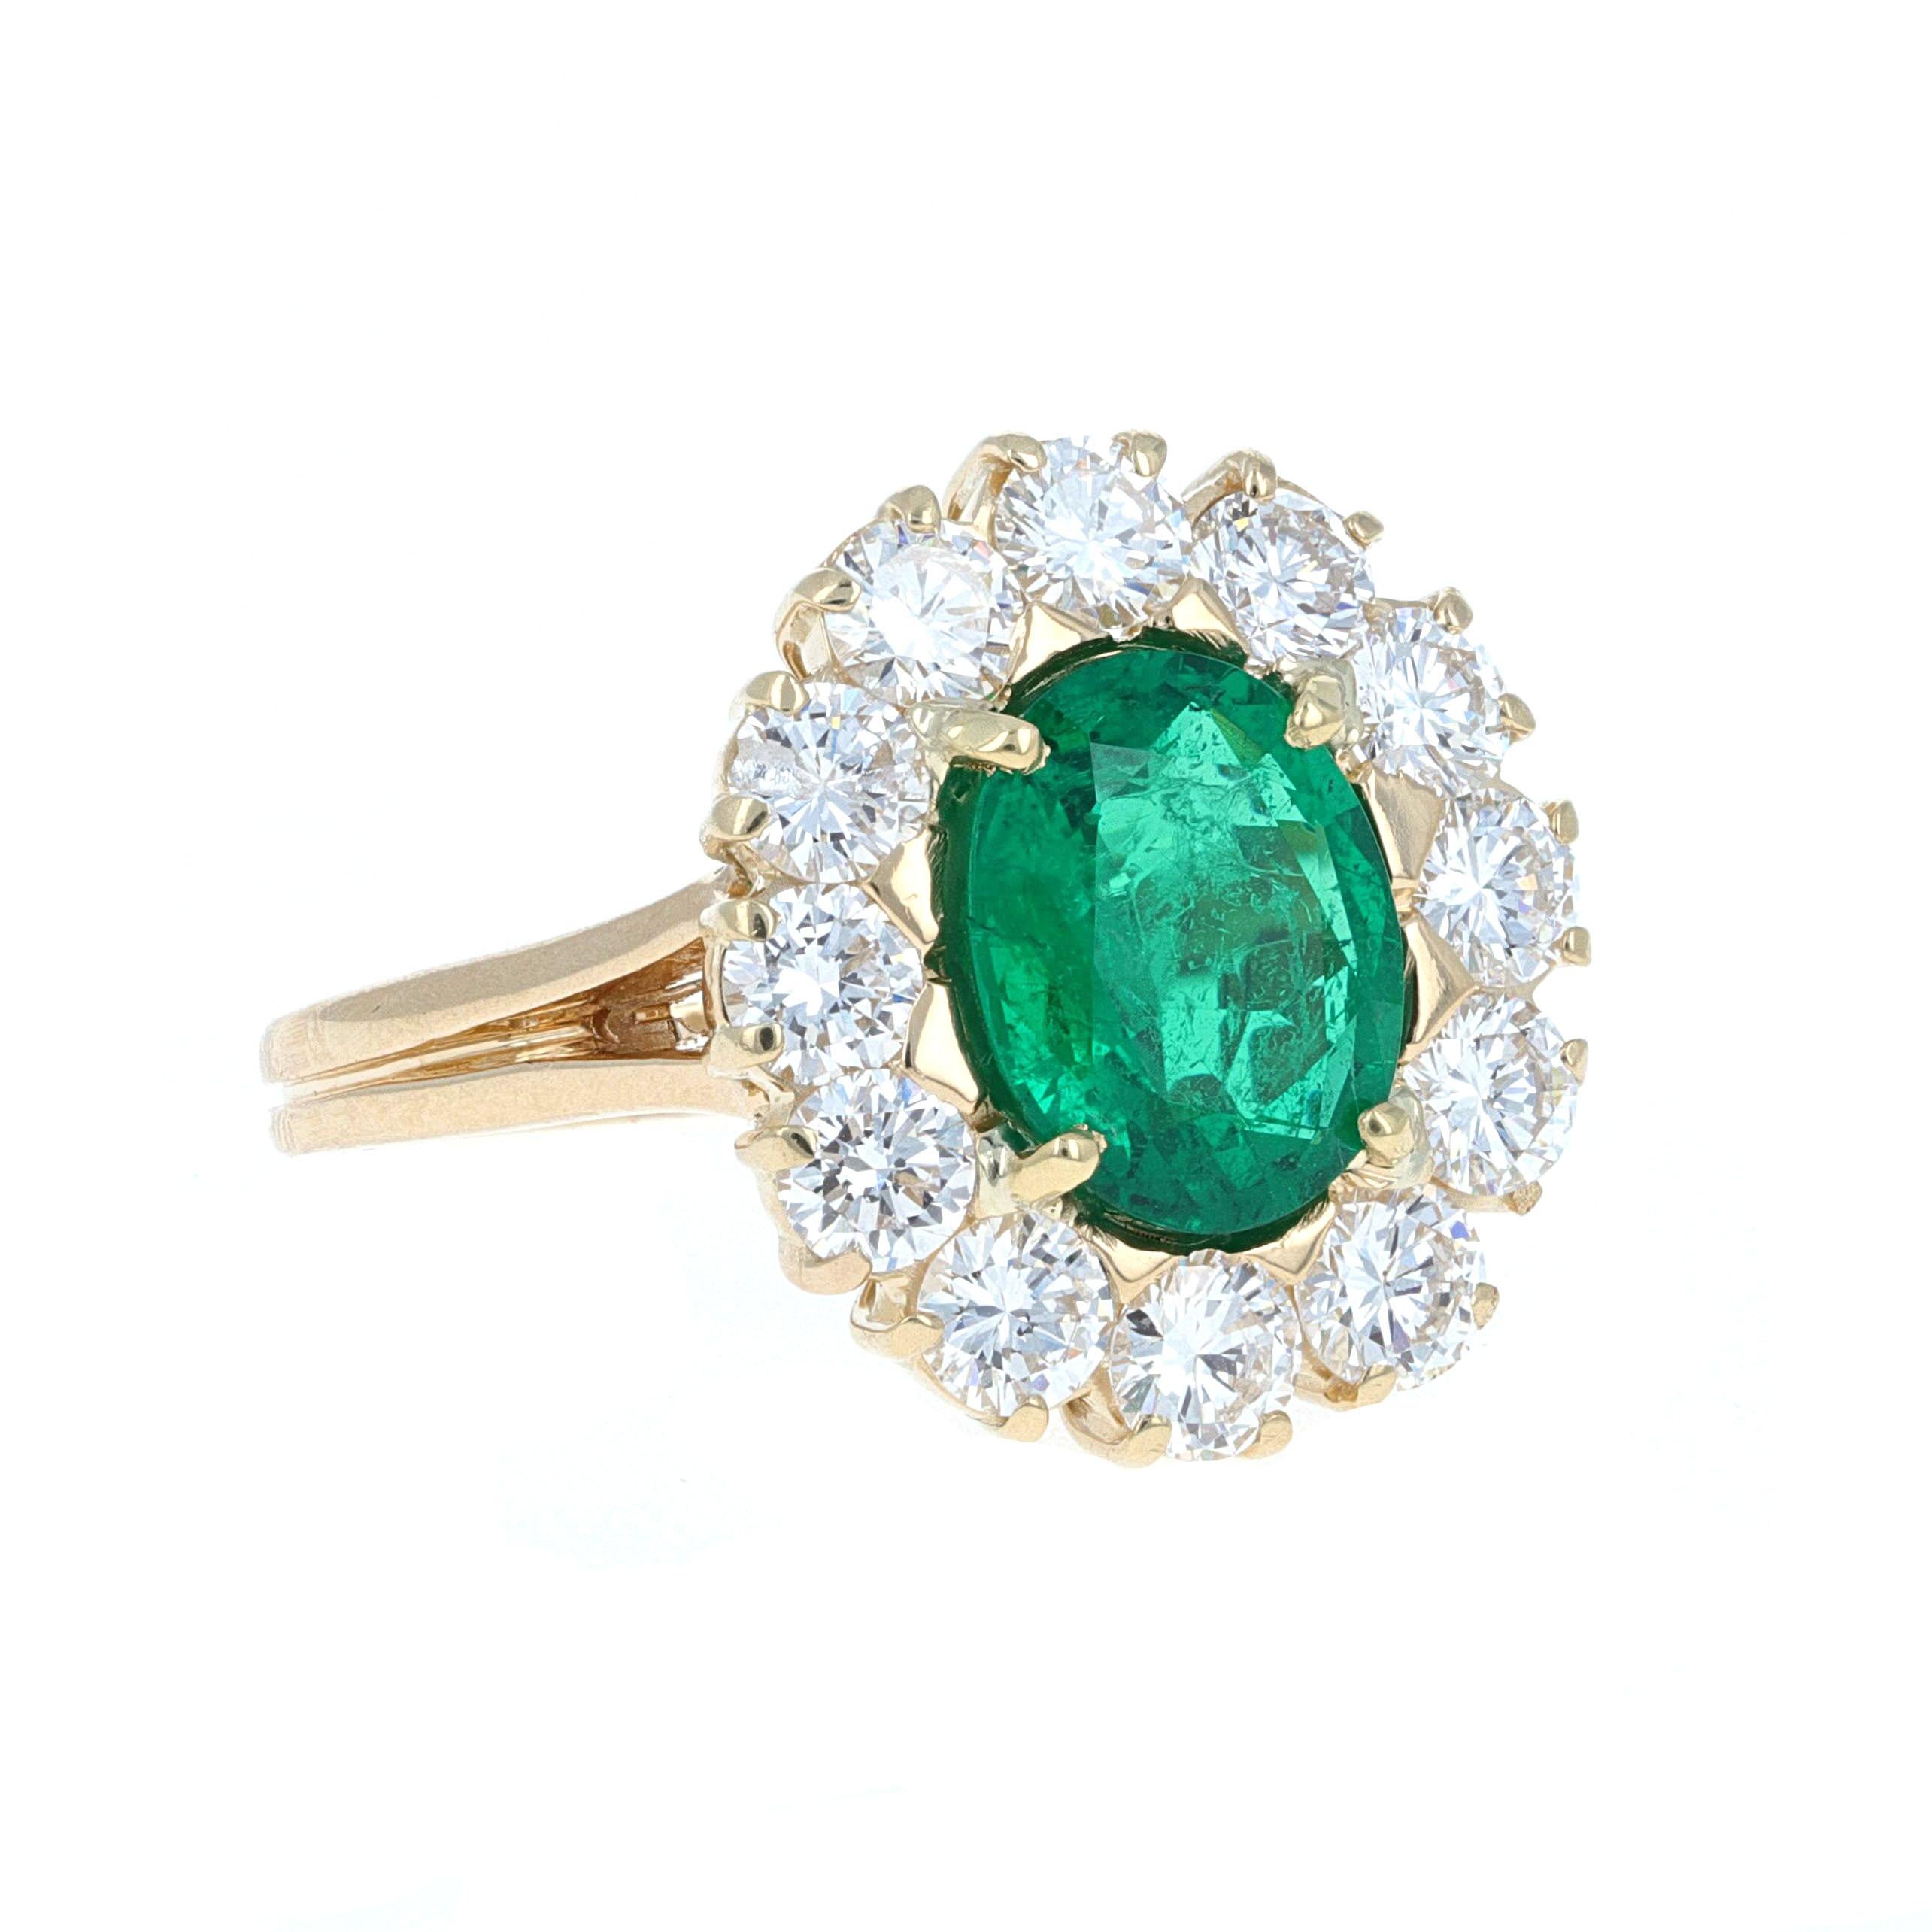 GUILD Lab Certified 2.47 carat oval shape natural emerald with round brilliant diamonds, cocktail ring. The ring is mounted in 18 karat yellow gold and has 12 round brillant cut white diammonds surrounding it. All of the diamonds match in color and